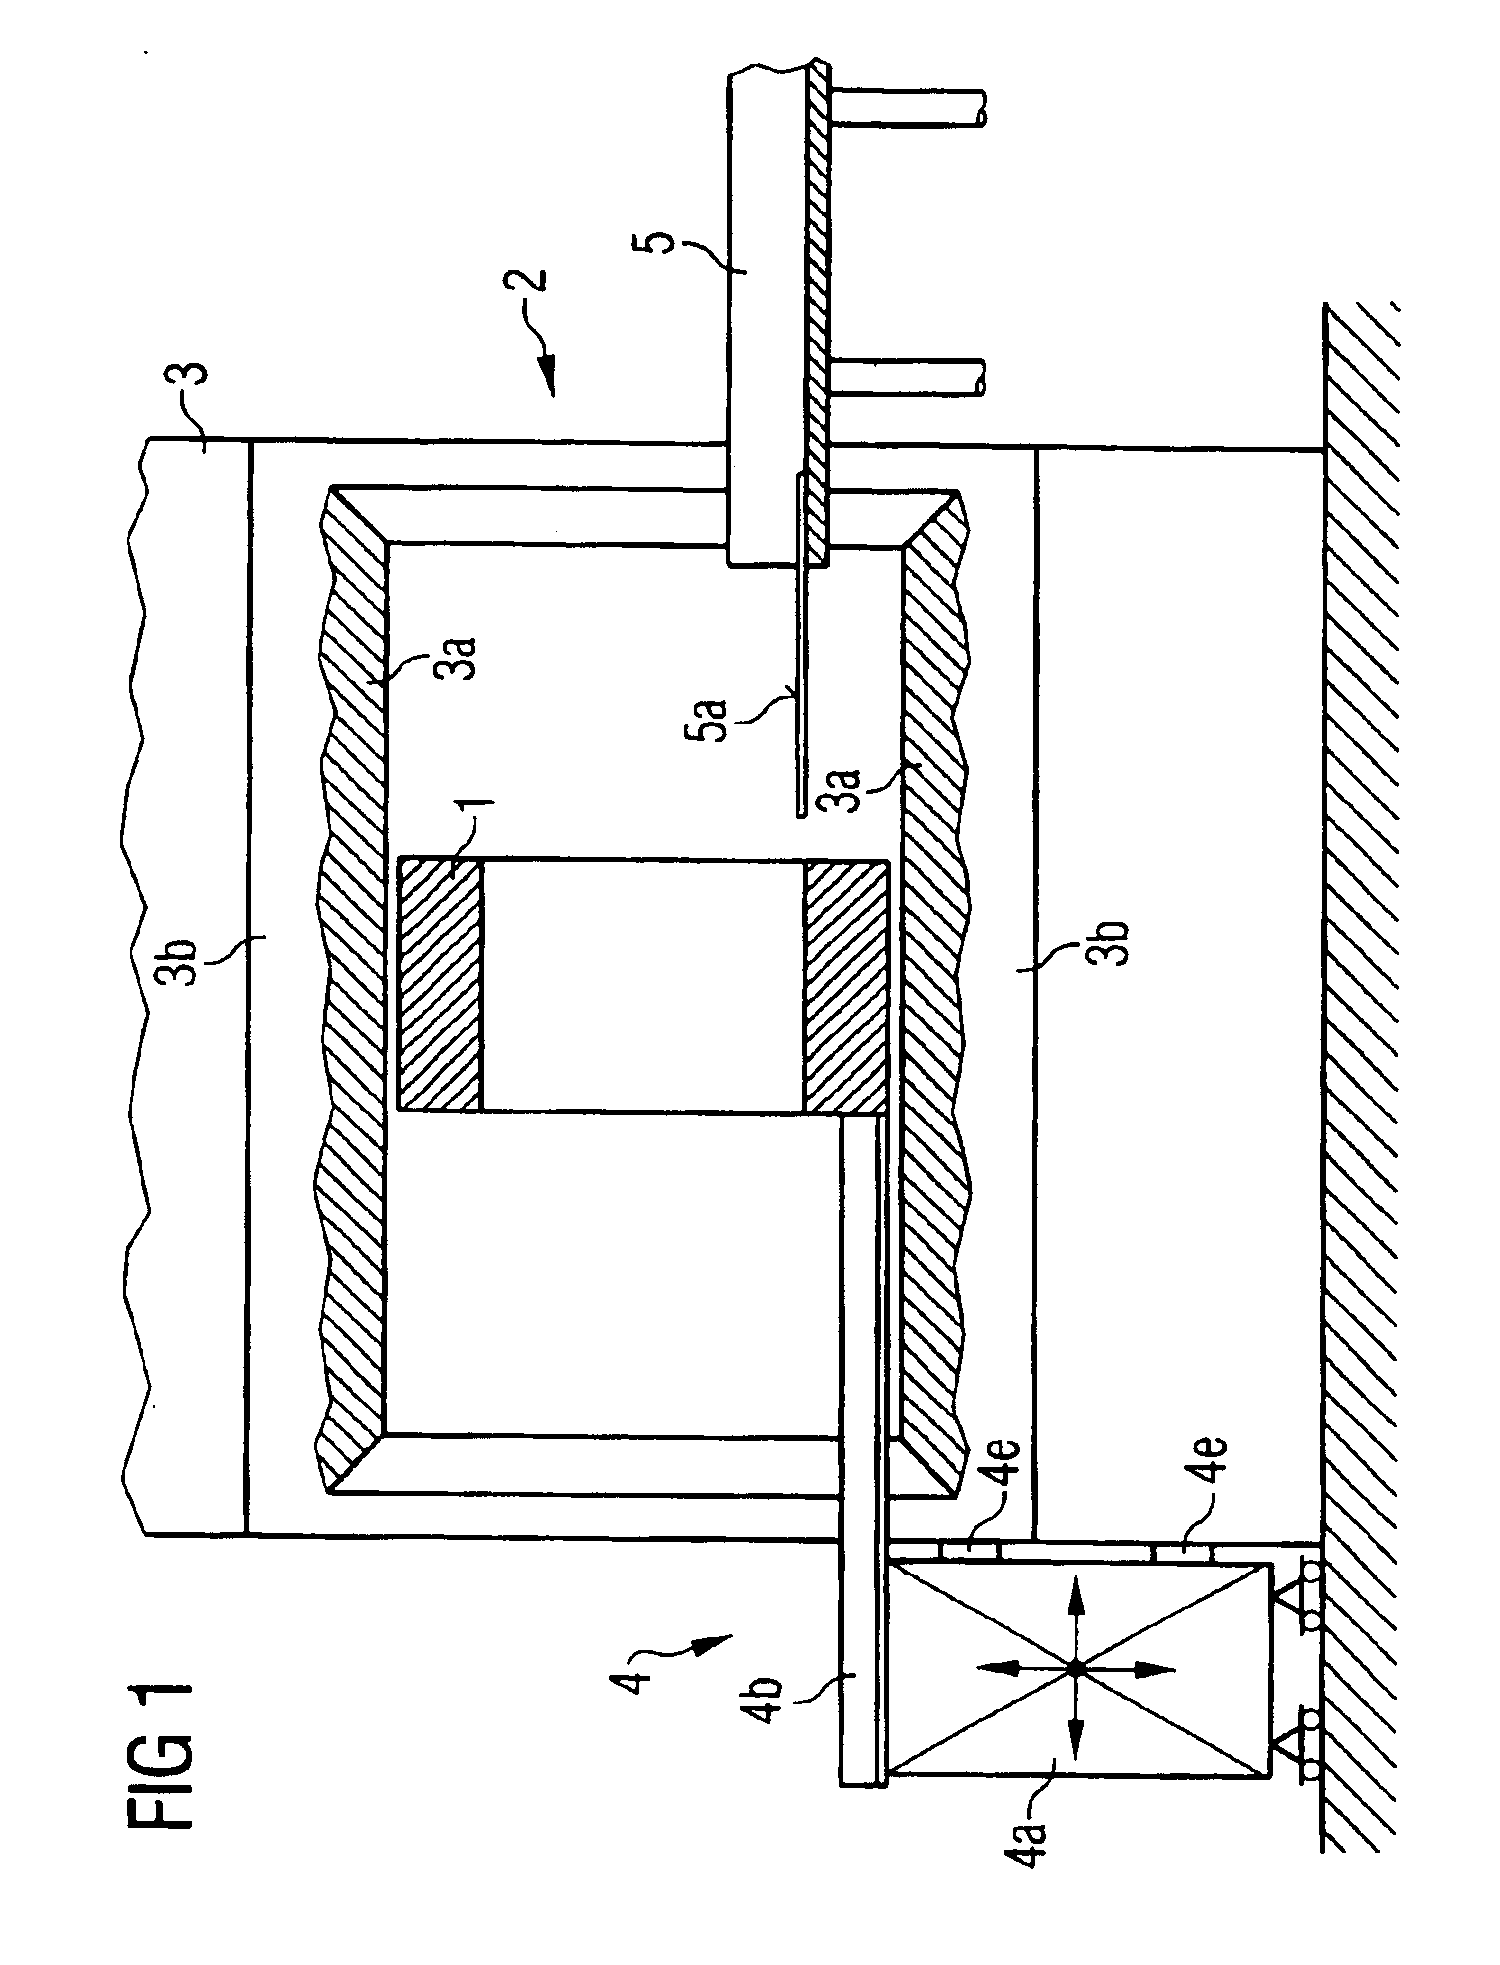 Insertion device for gradient coils of a magnetic resonance apparatus